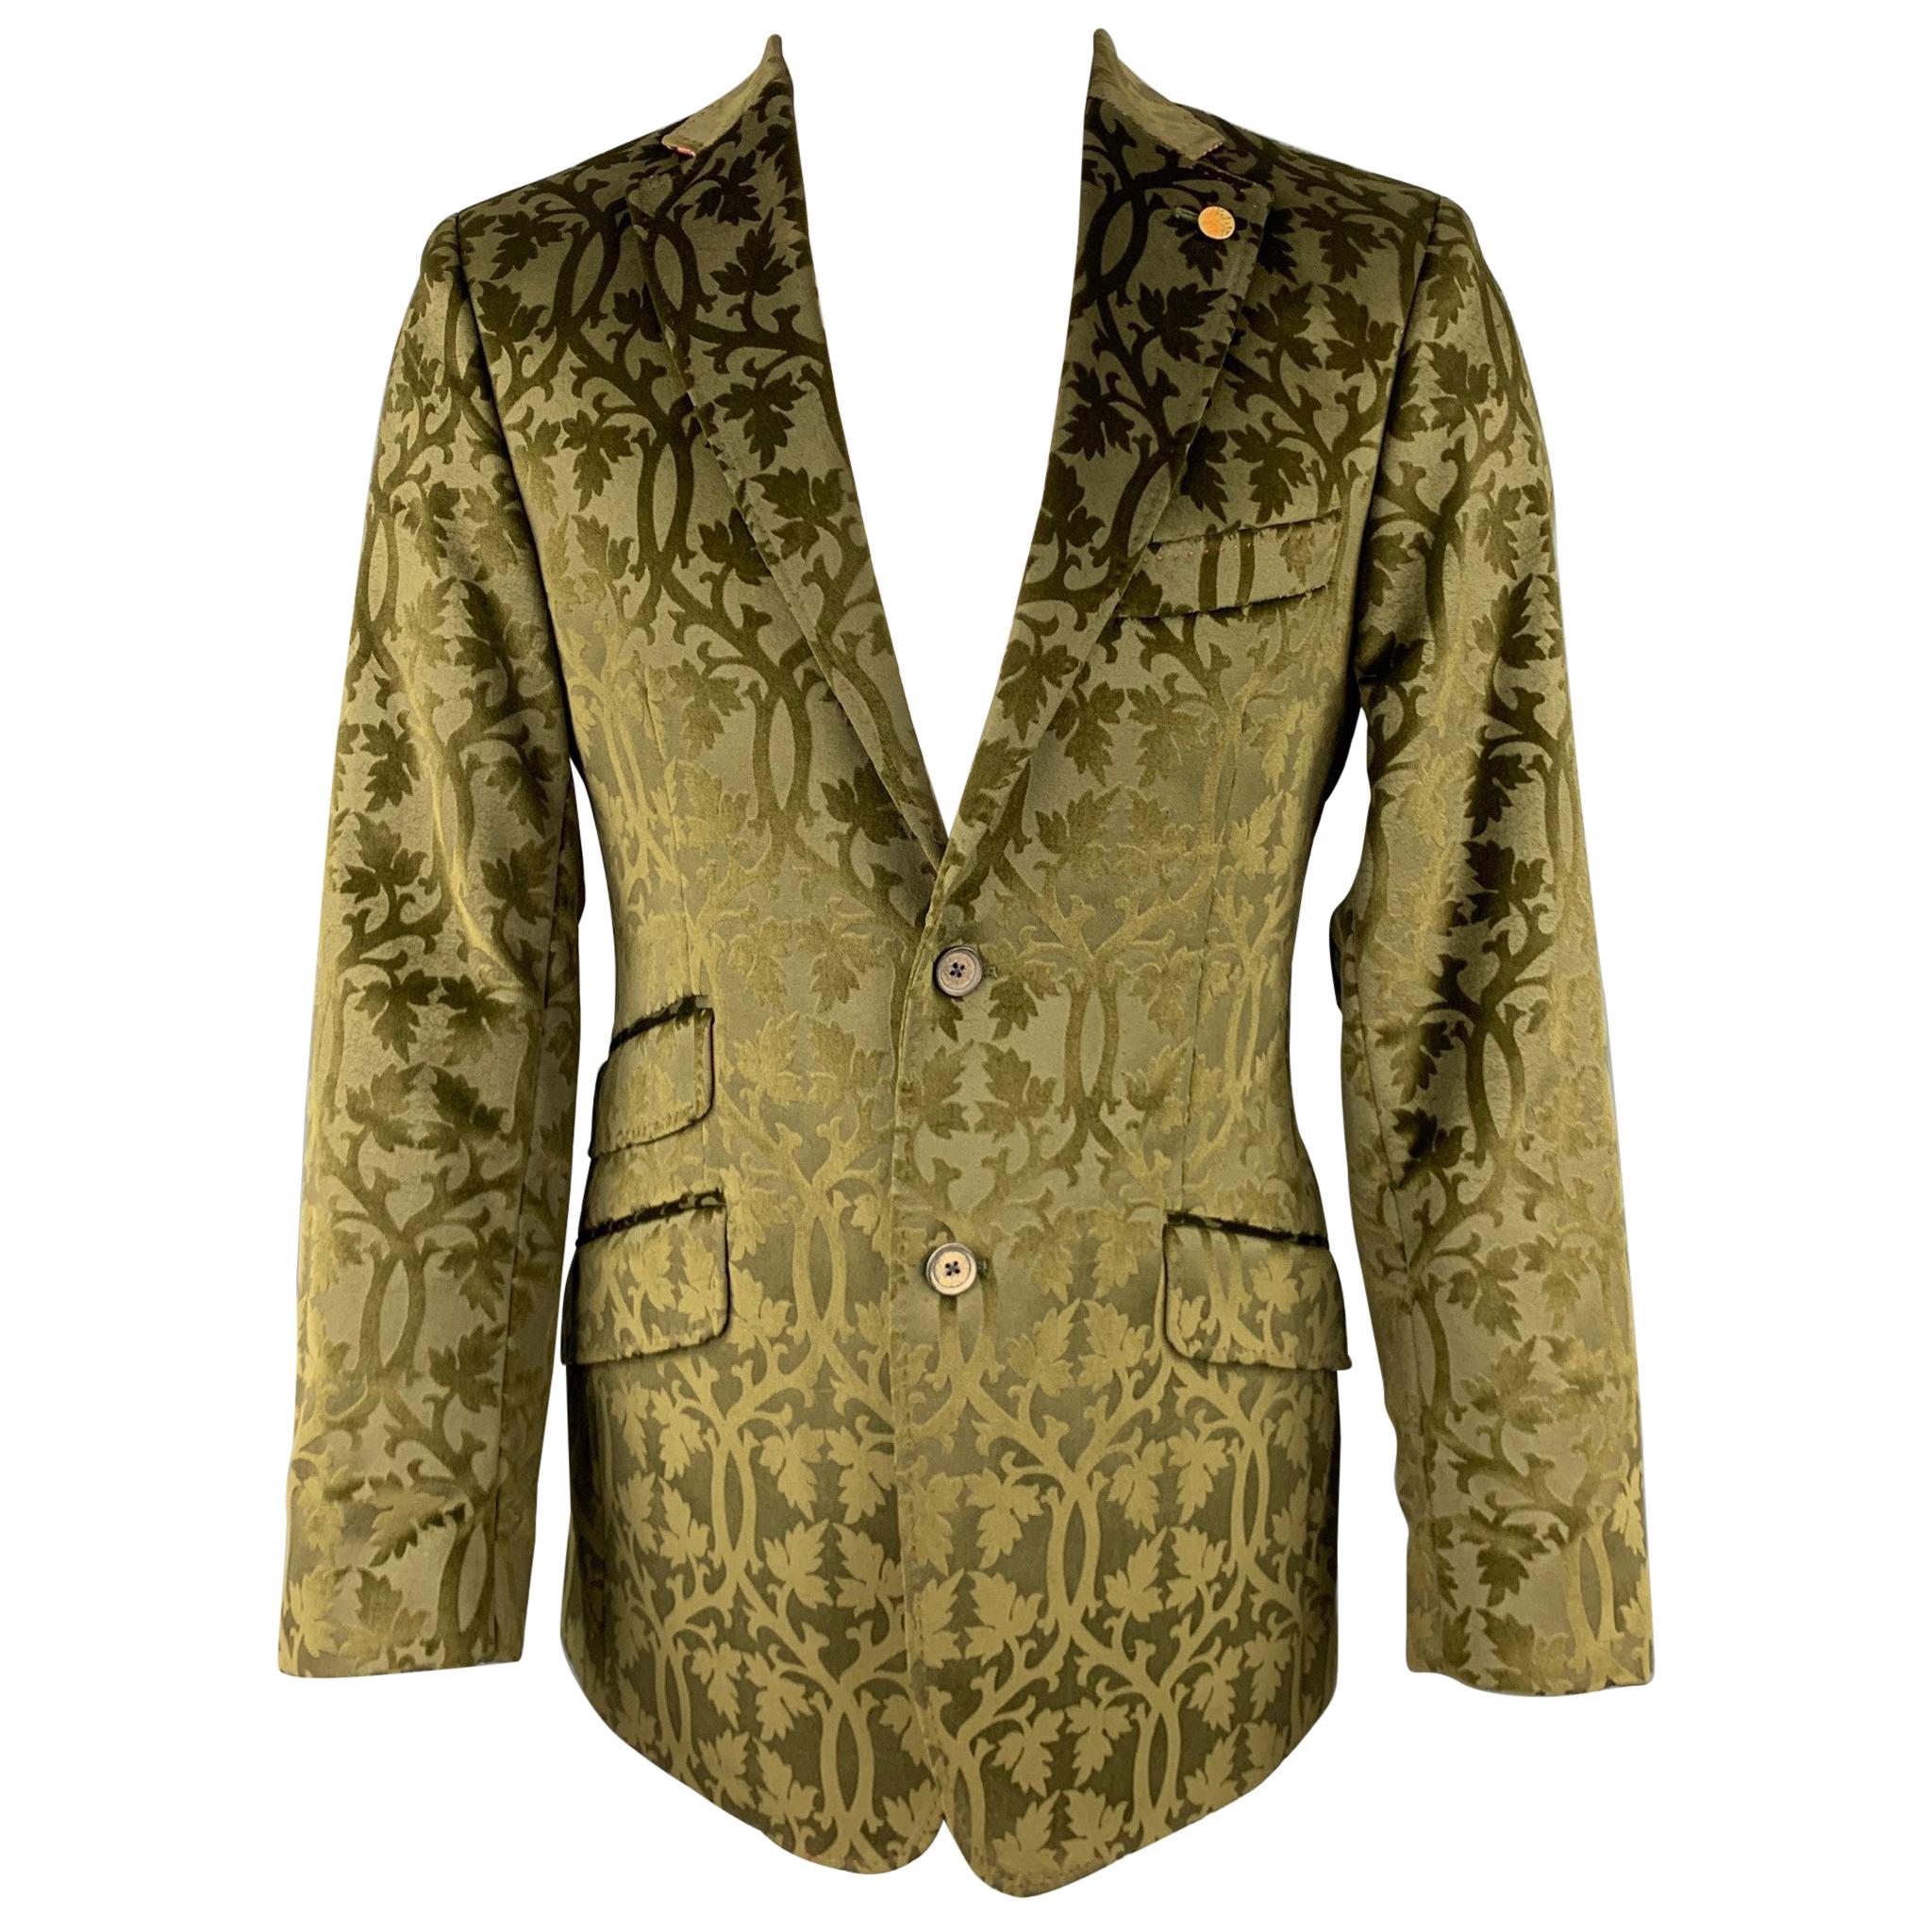 Fine and rare 1970s glam rock feathered waistcoat For Sale at 1stDibs